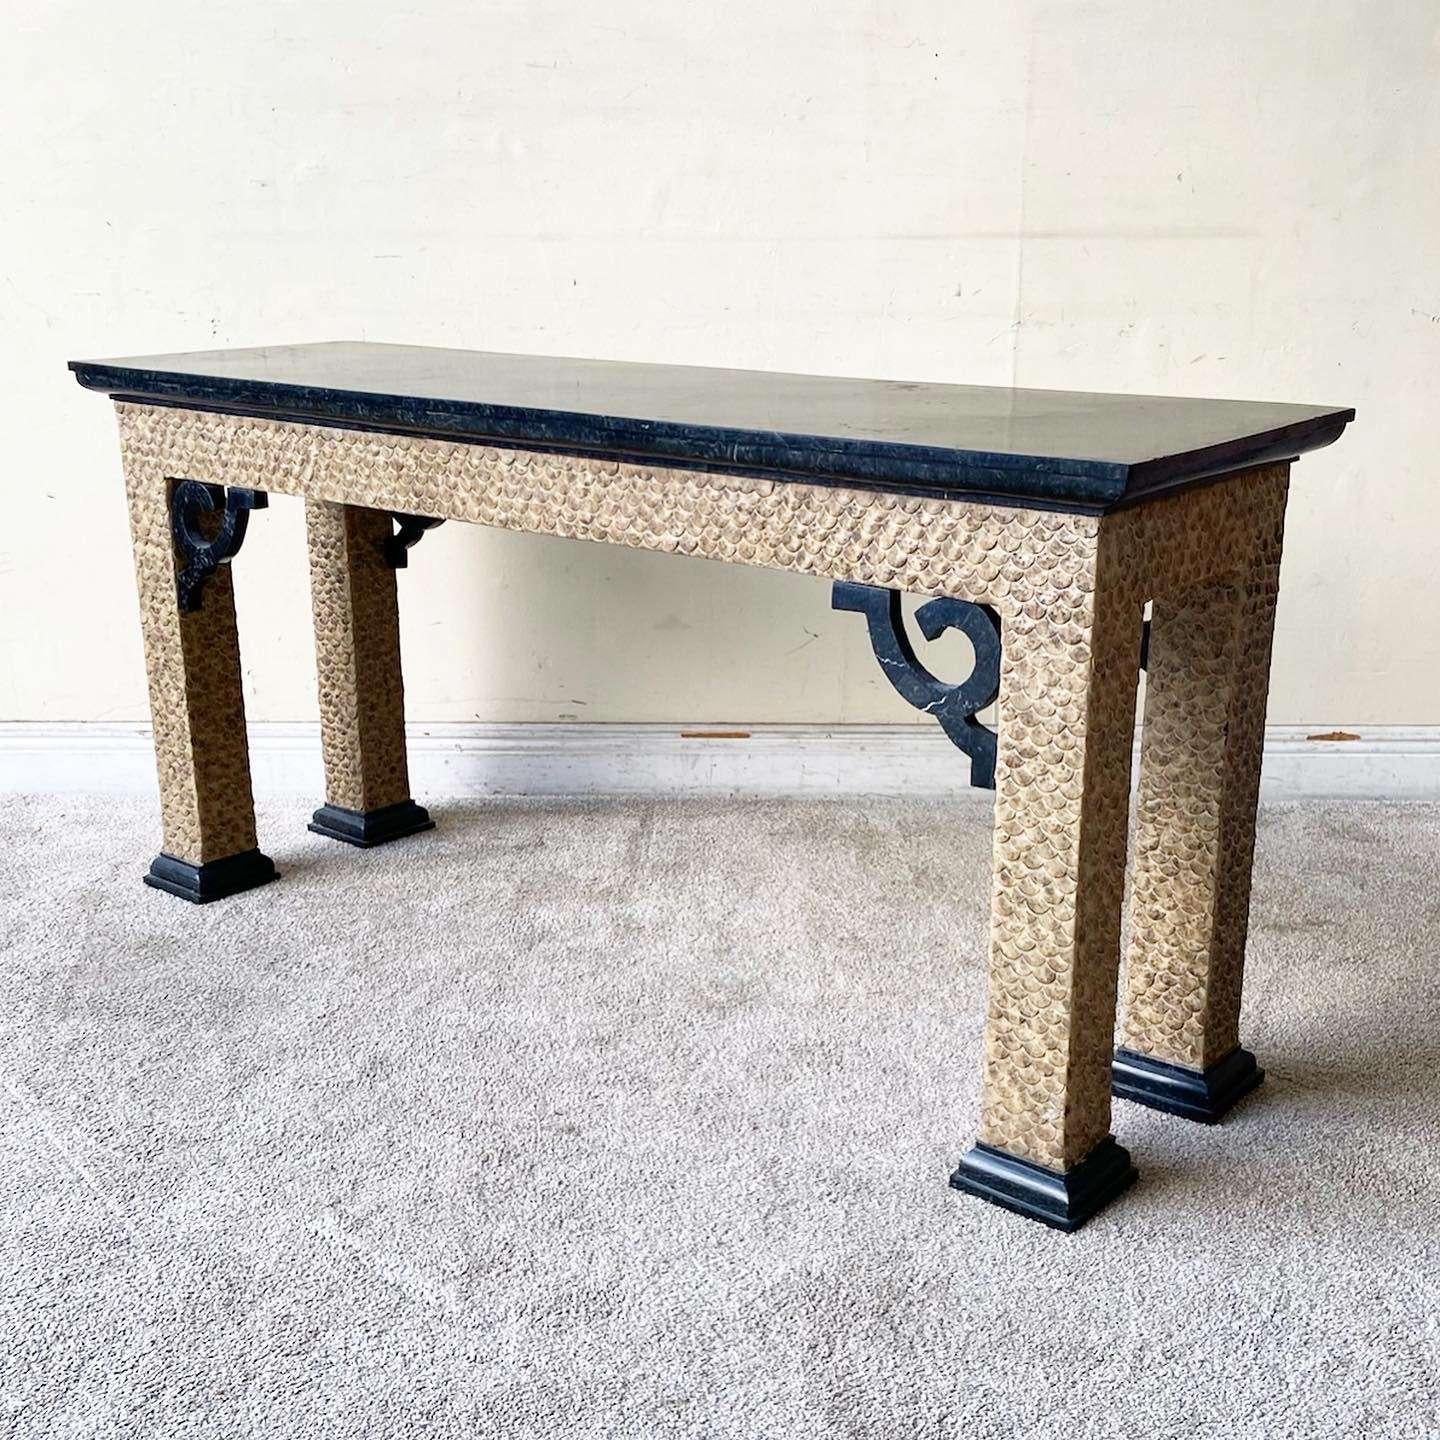 Exceptional vintage chinoiserie console table. Features a tessellated black stone top with a carved wooden frame.